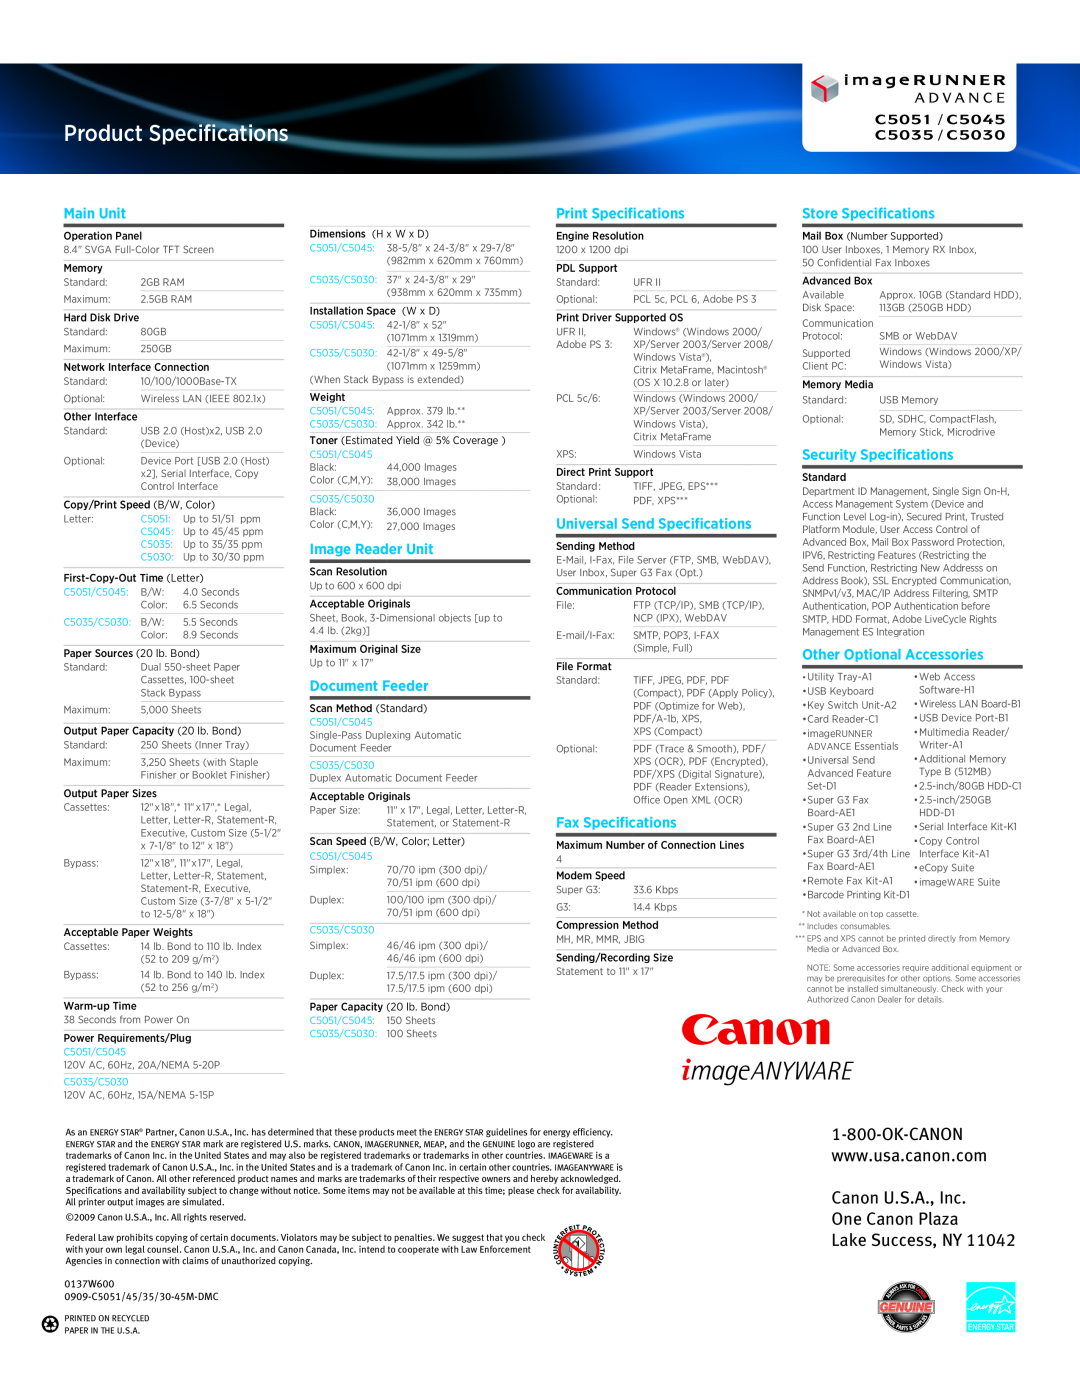 Canon C5045 Canon U.S.A., Inc One Canon Plaza Lake Success, NY, Product Specifications, Main Unit, Print Specifications 